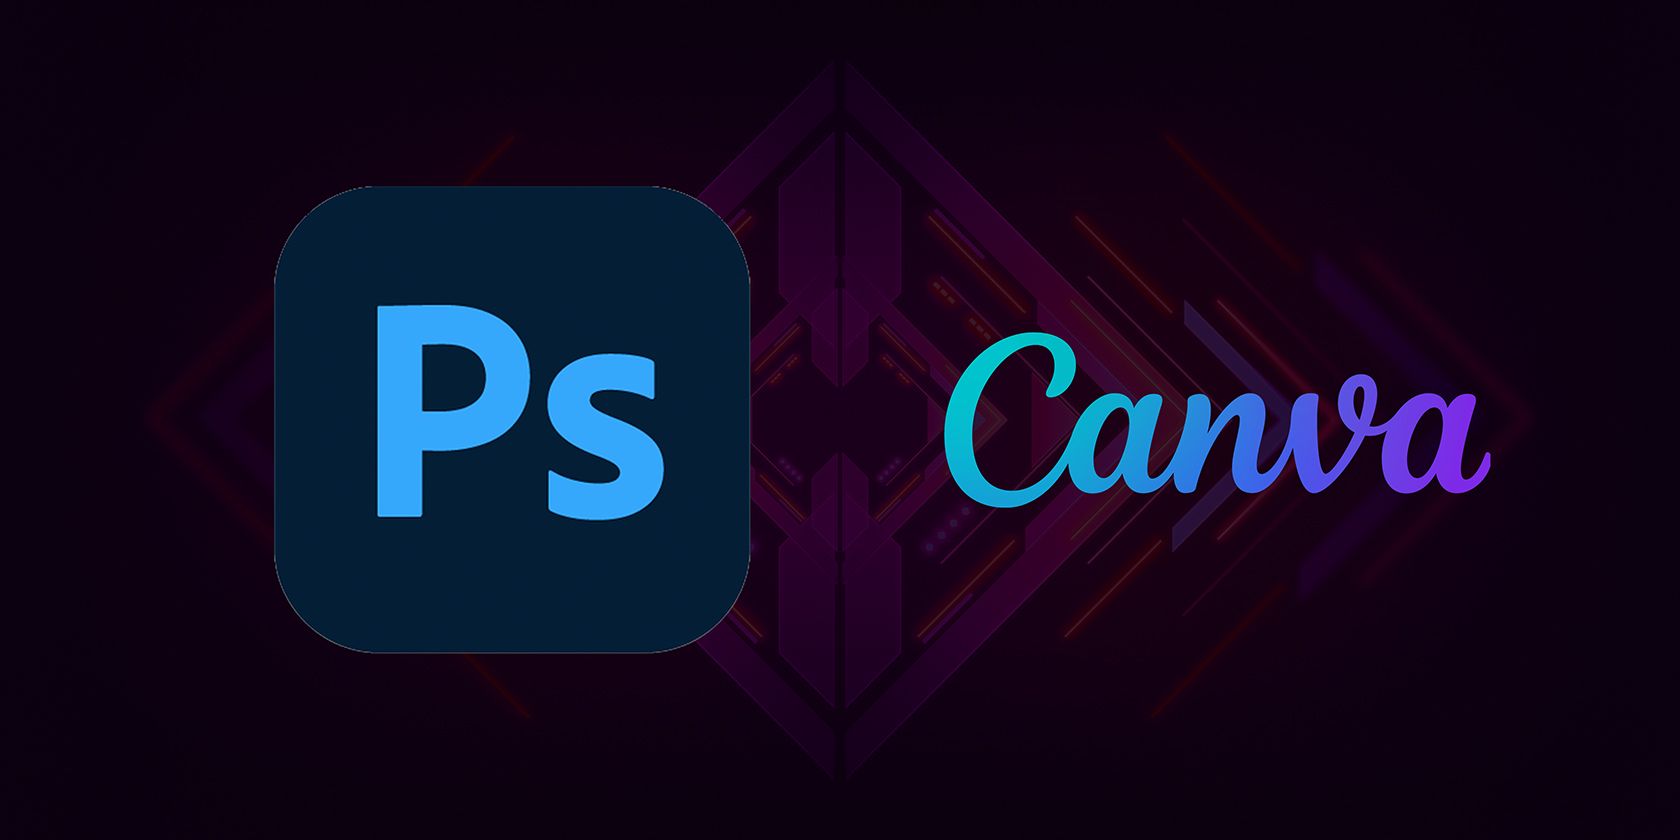 Photoshop and Canva logos on arrow background